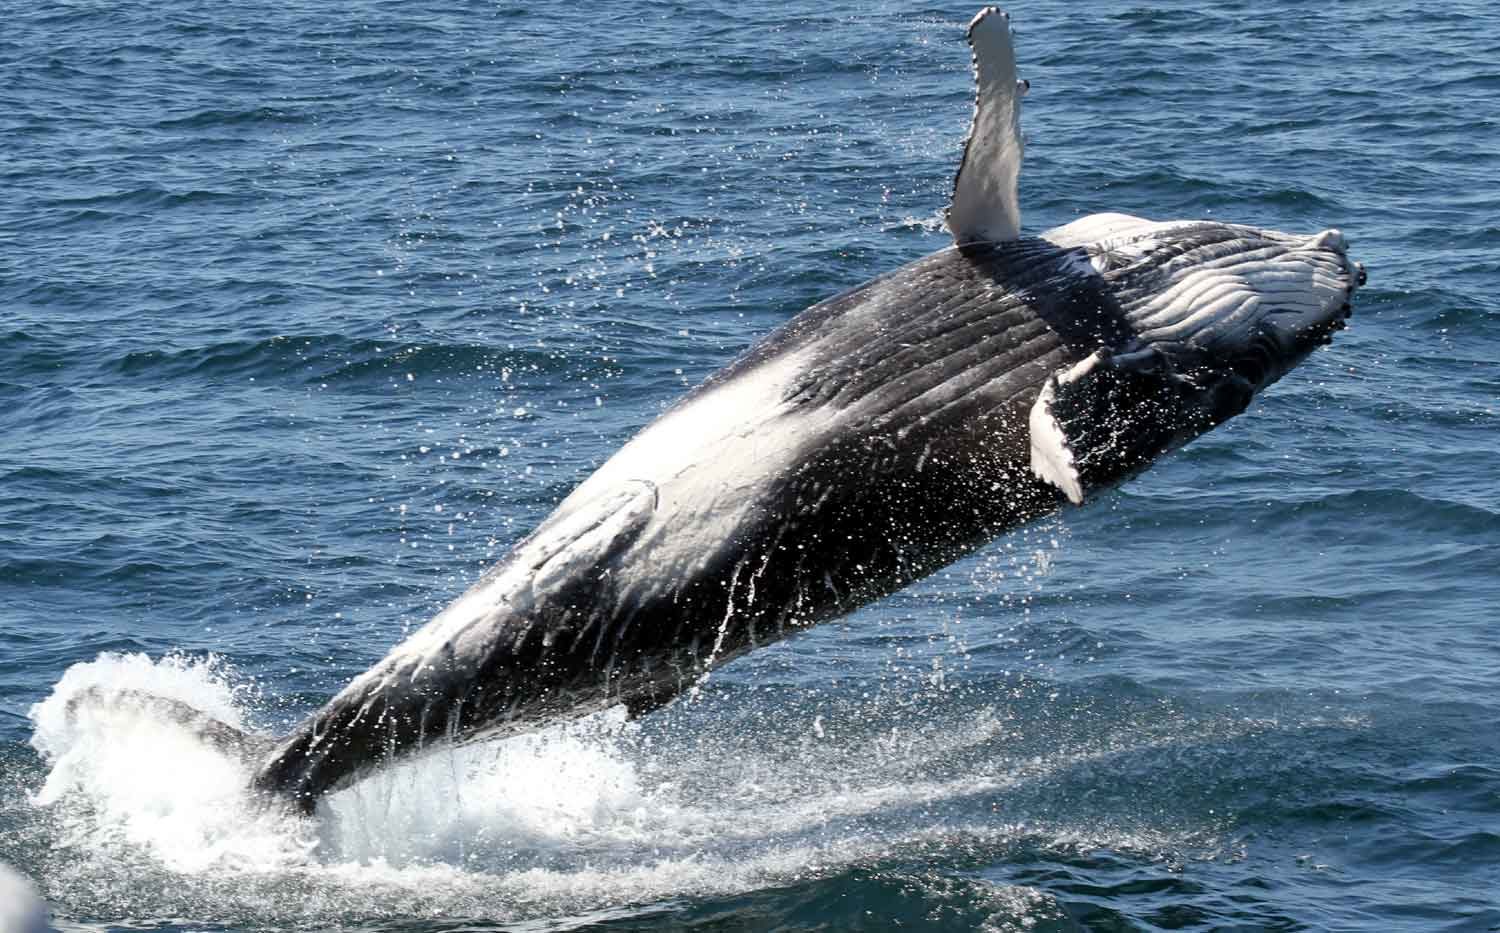 Calf Breaching - Whale Watching Experience